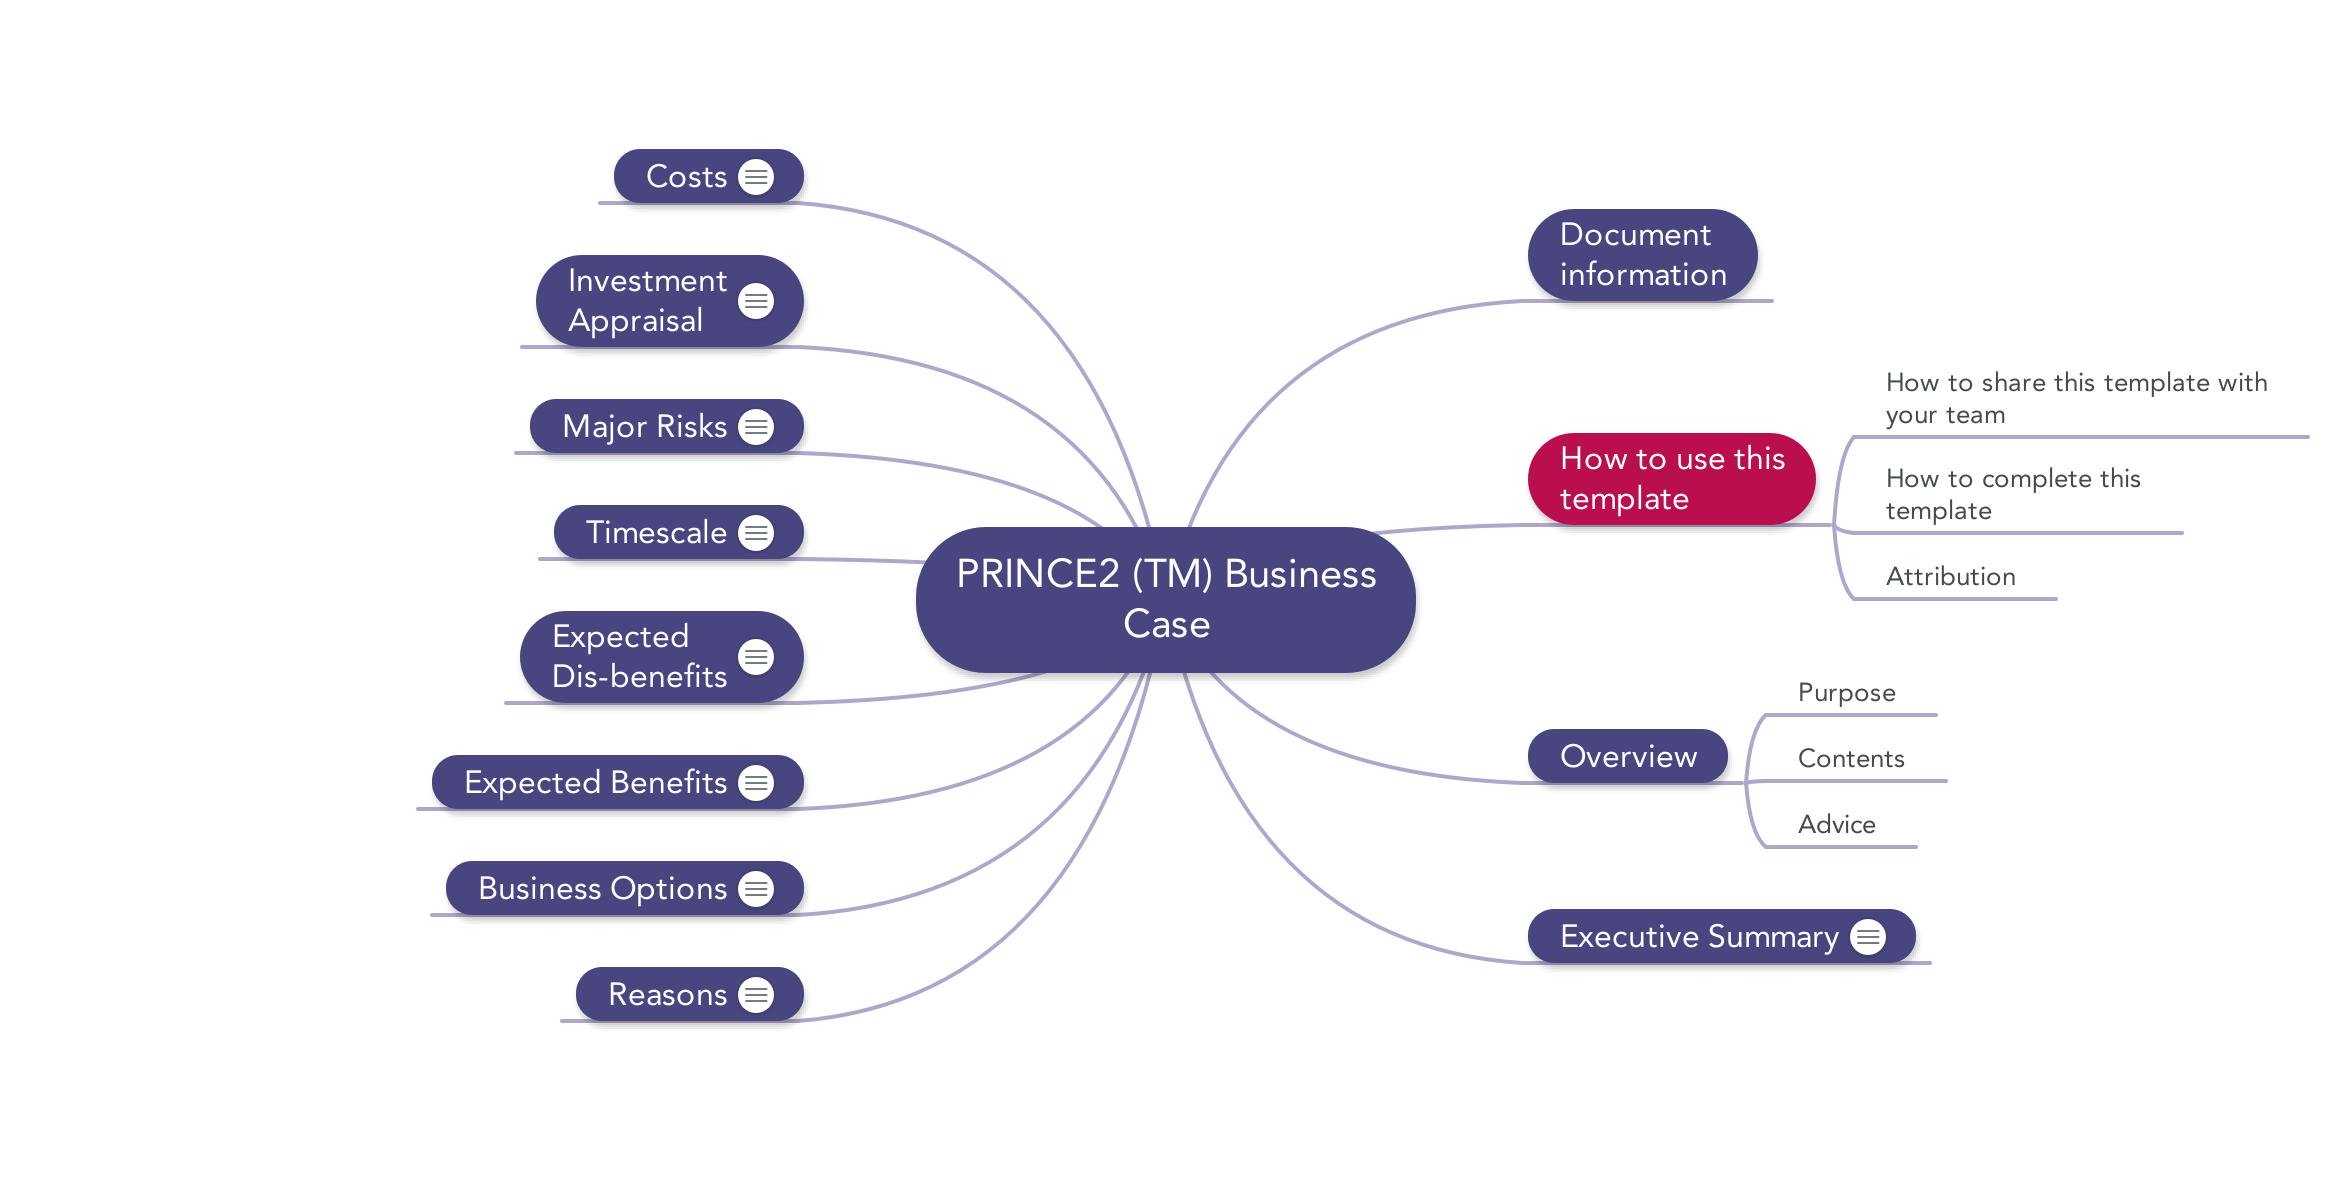 Prince2 Business Case | Download Template For Prince2 Lessons Learned Report Template